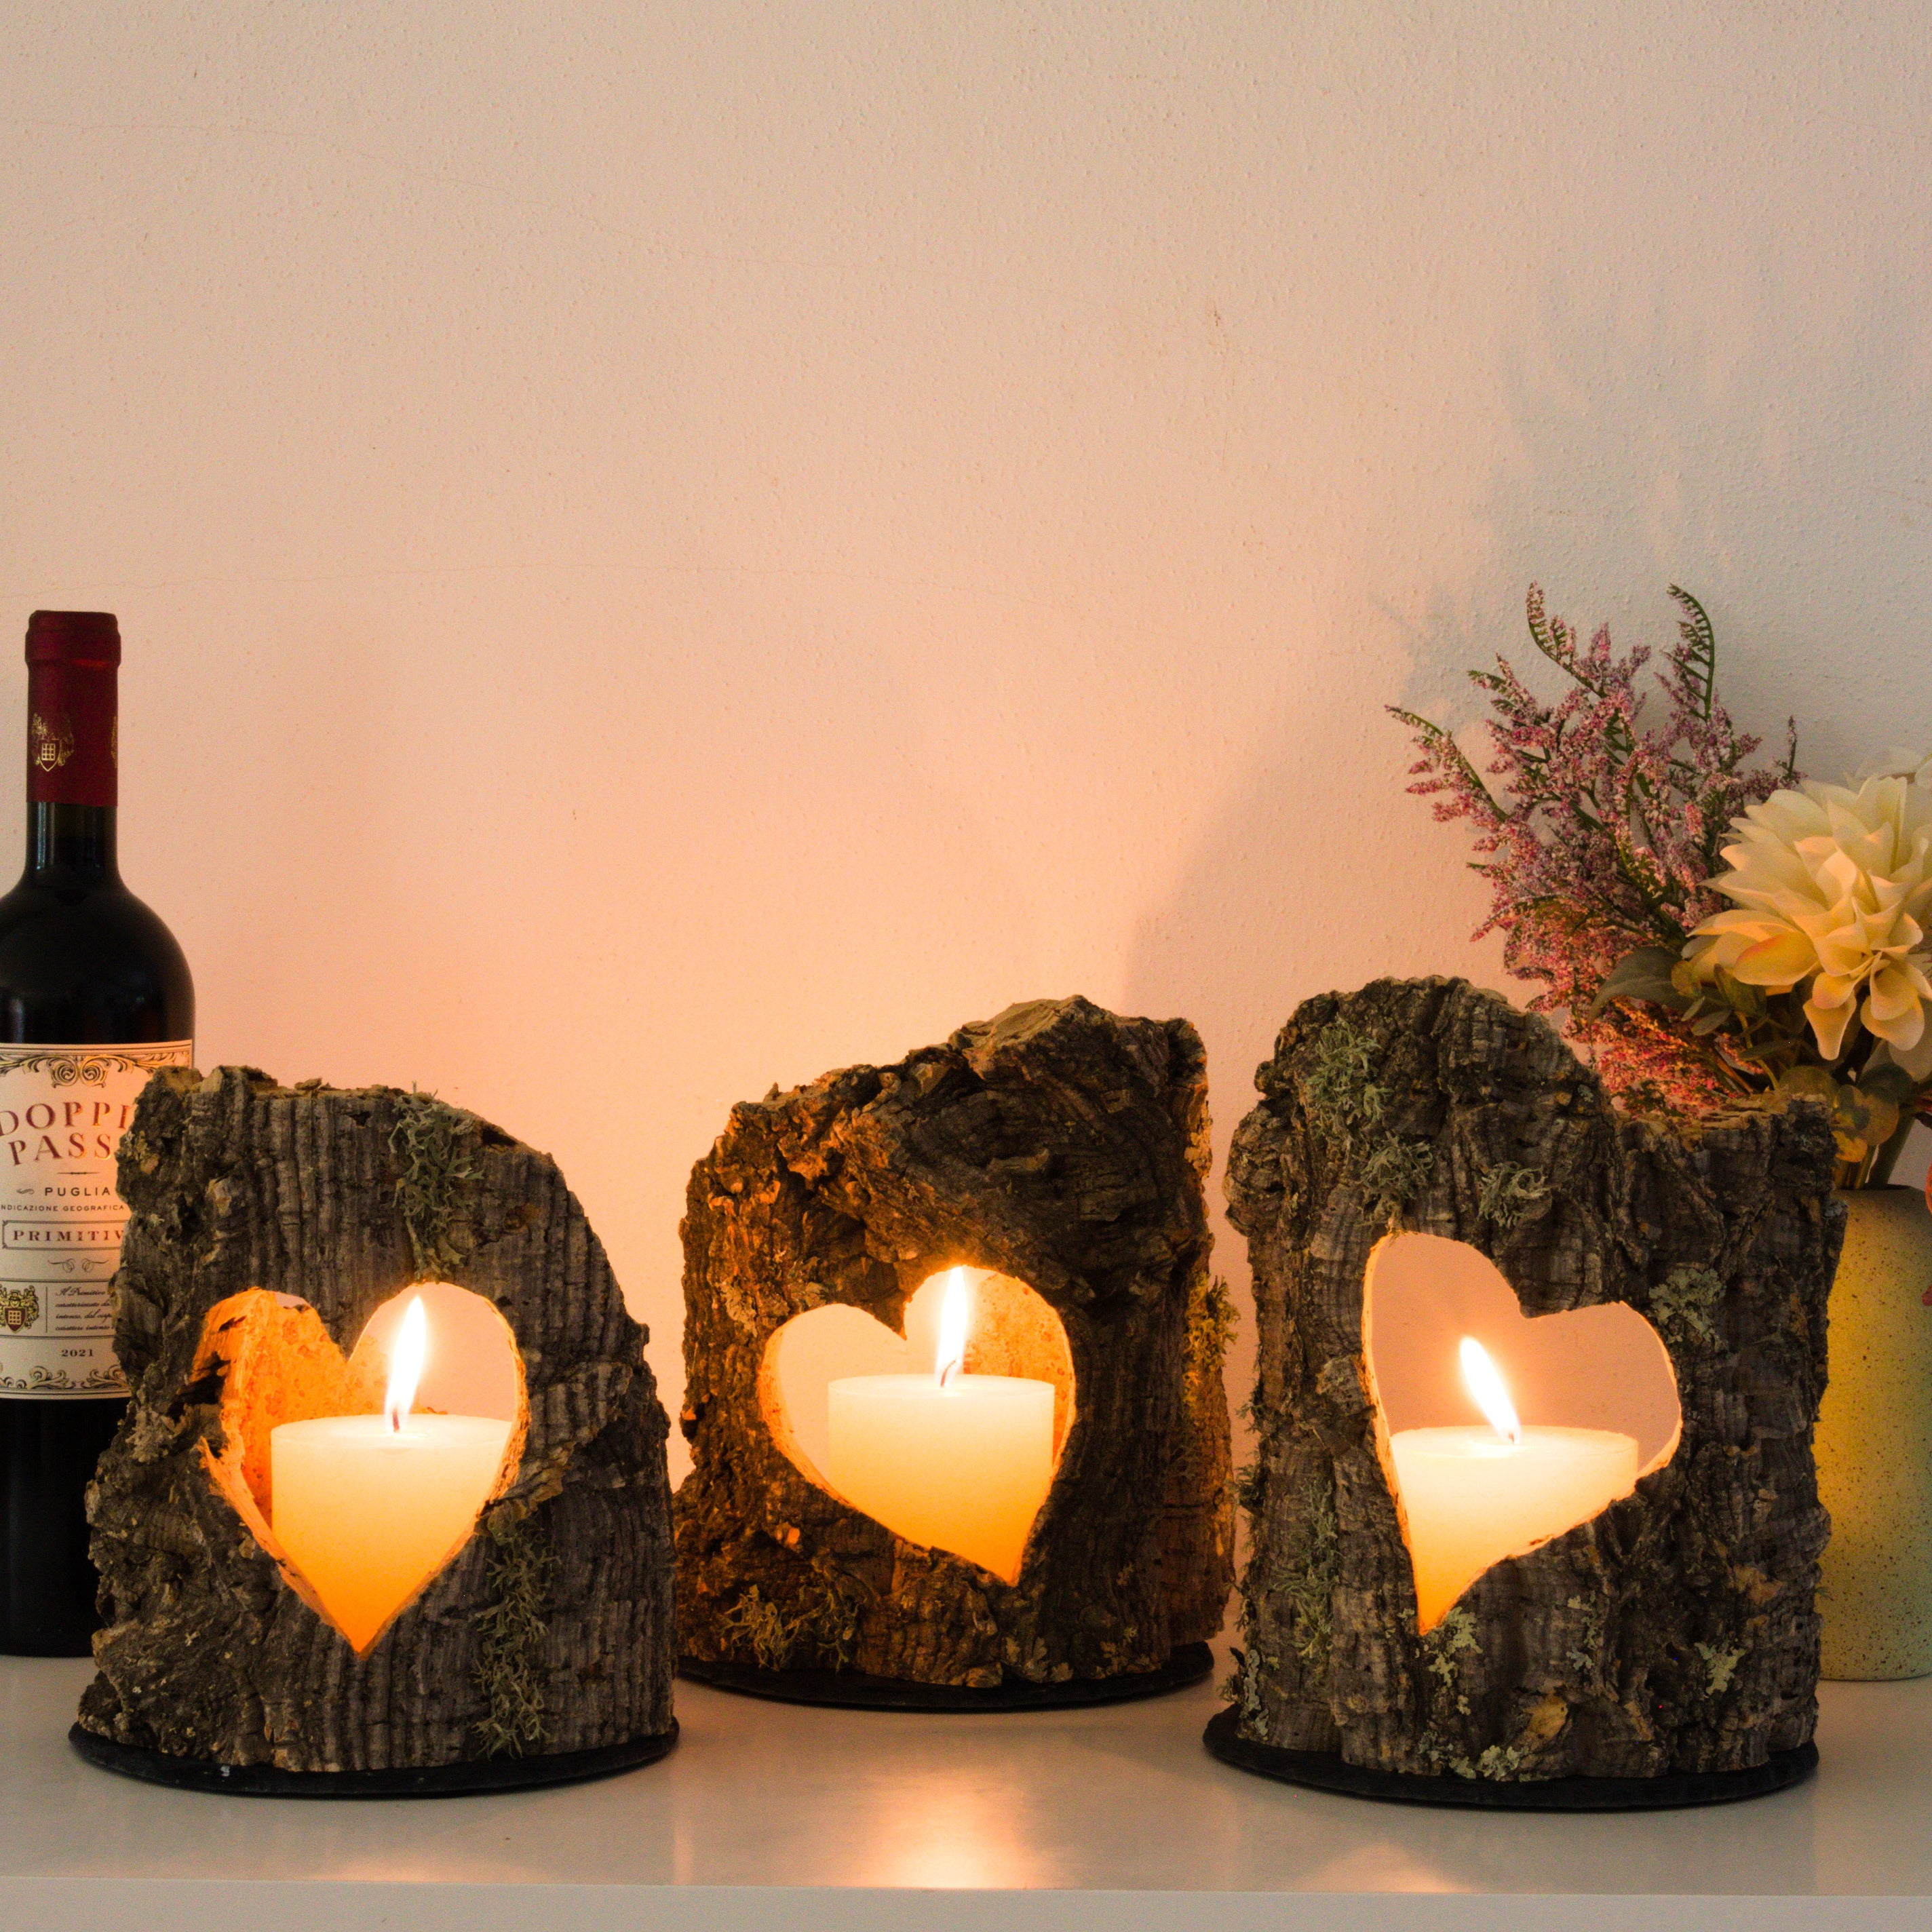 verKORKst premium cork lantern * with heart cutout * SPECIAL OFFER from EUR 46.00* candle holder * high-quality decoration for candles and wine bottles